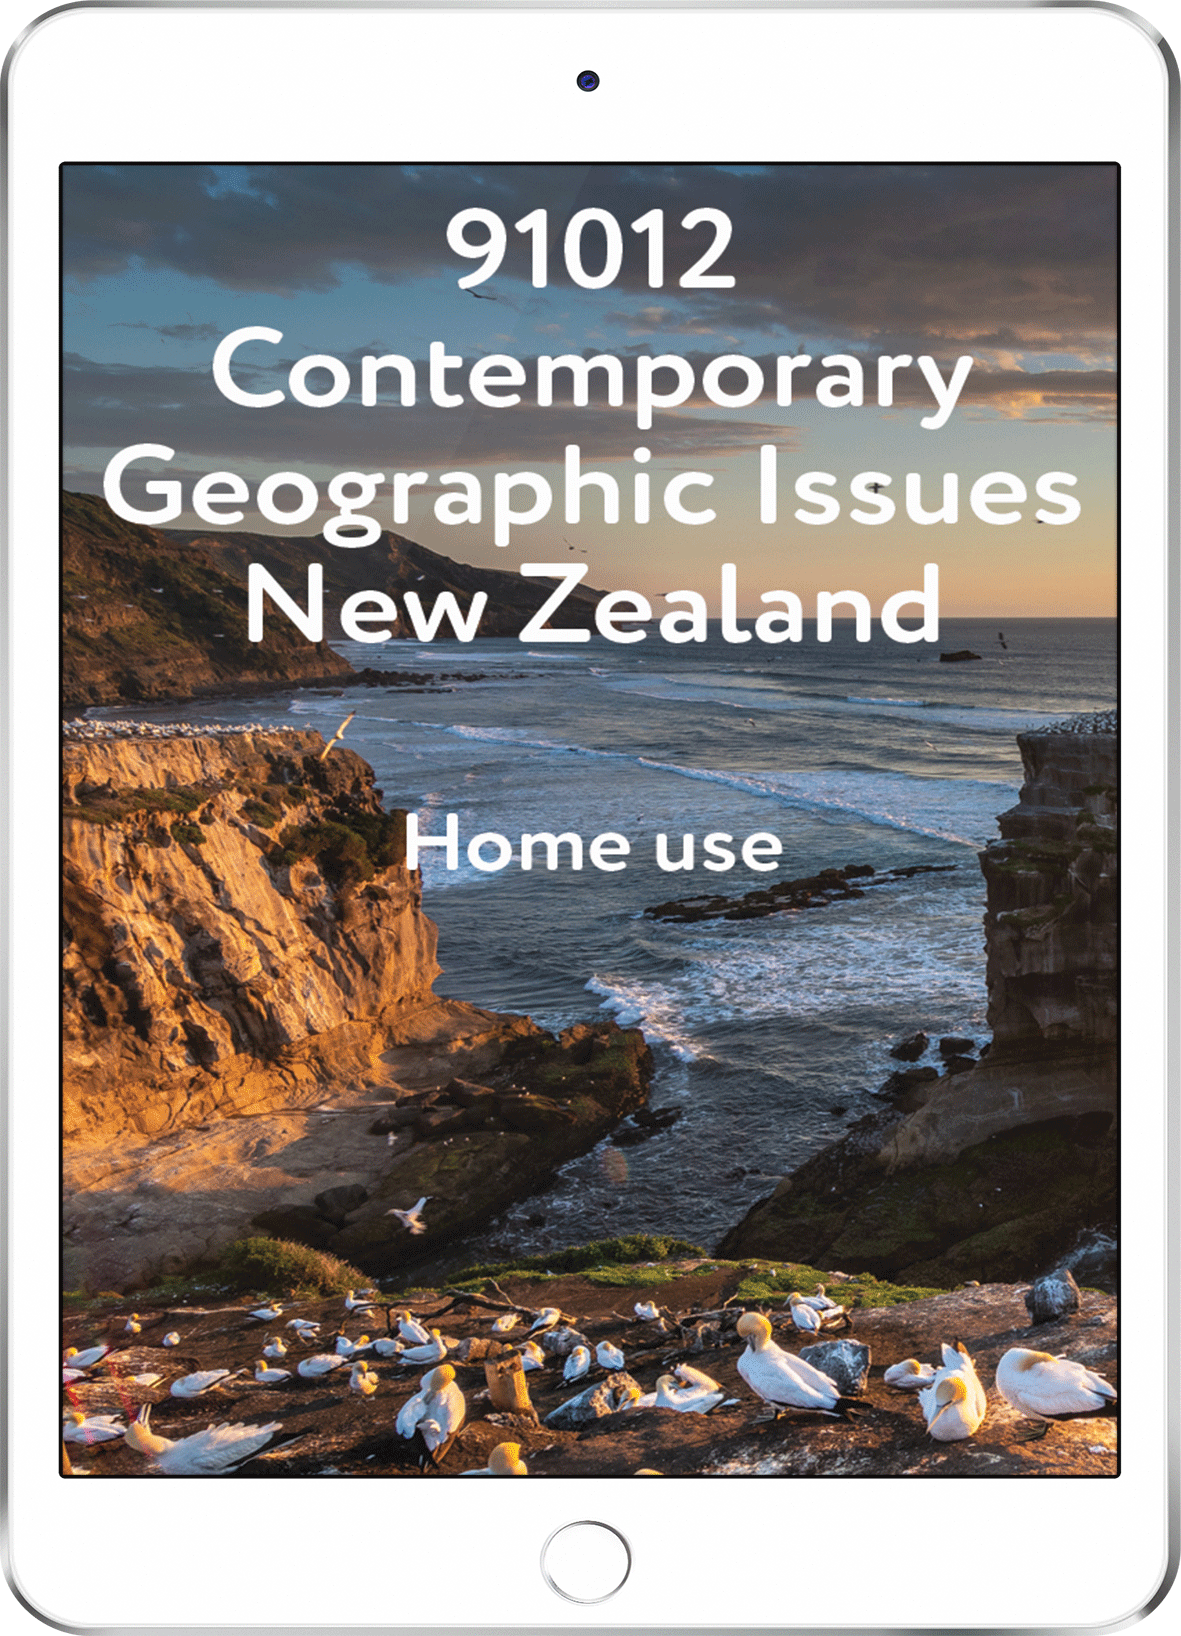 91012 Contemporary Geographic Issues NZ - Home Use